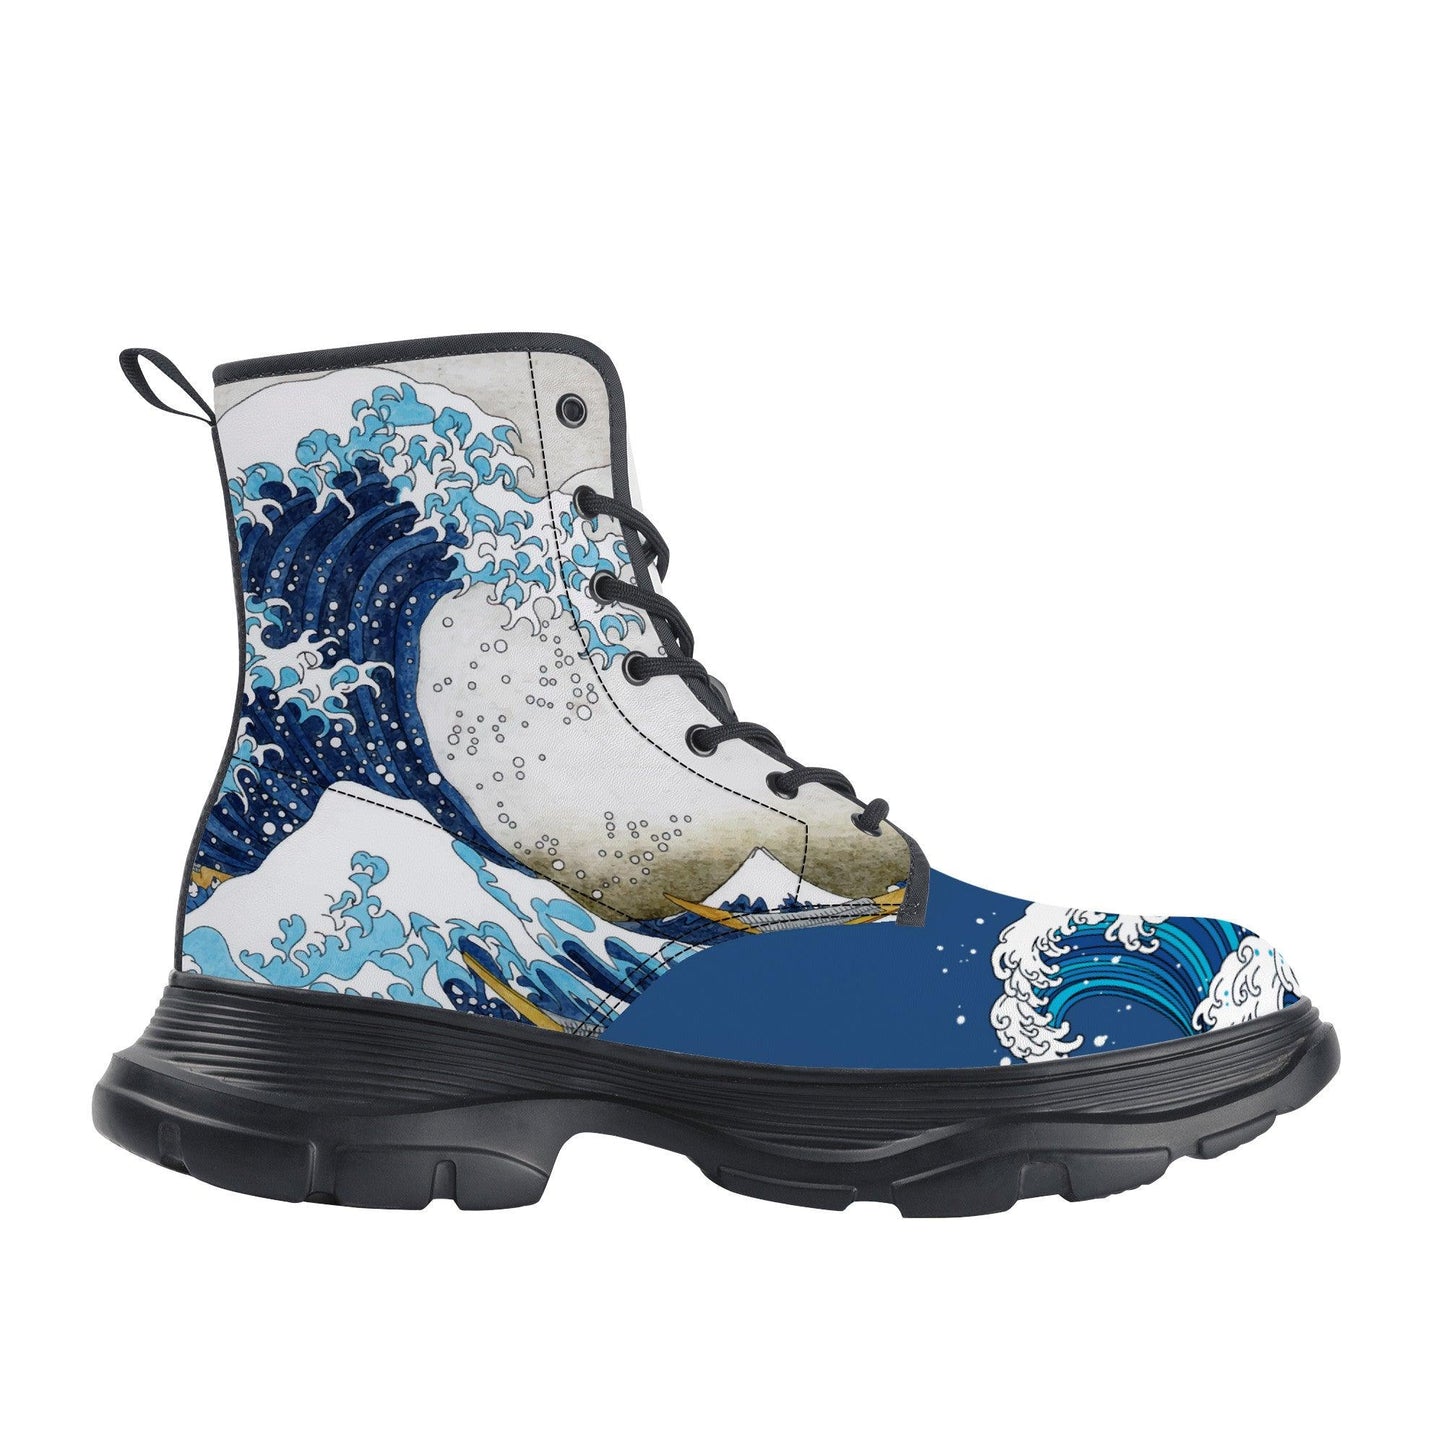 Under the Wave off Kanagawa (Kanagawa oki nami ura), also known as The Great Wave, from the series Thirty-six Views of Mount Fuji (Fugaku sanjūrokkei) by Katsushika Hokusai . Design applied on chunky boots with the dominant colour being royal blue. The waves paintings have been carefully placed on each of the sides of the boots